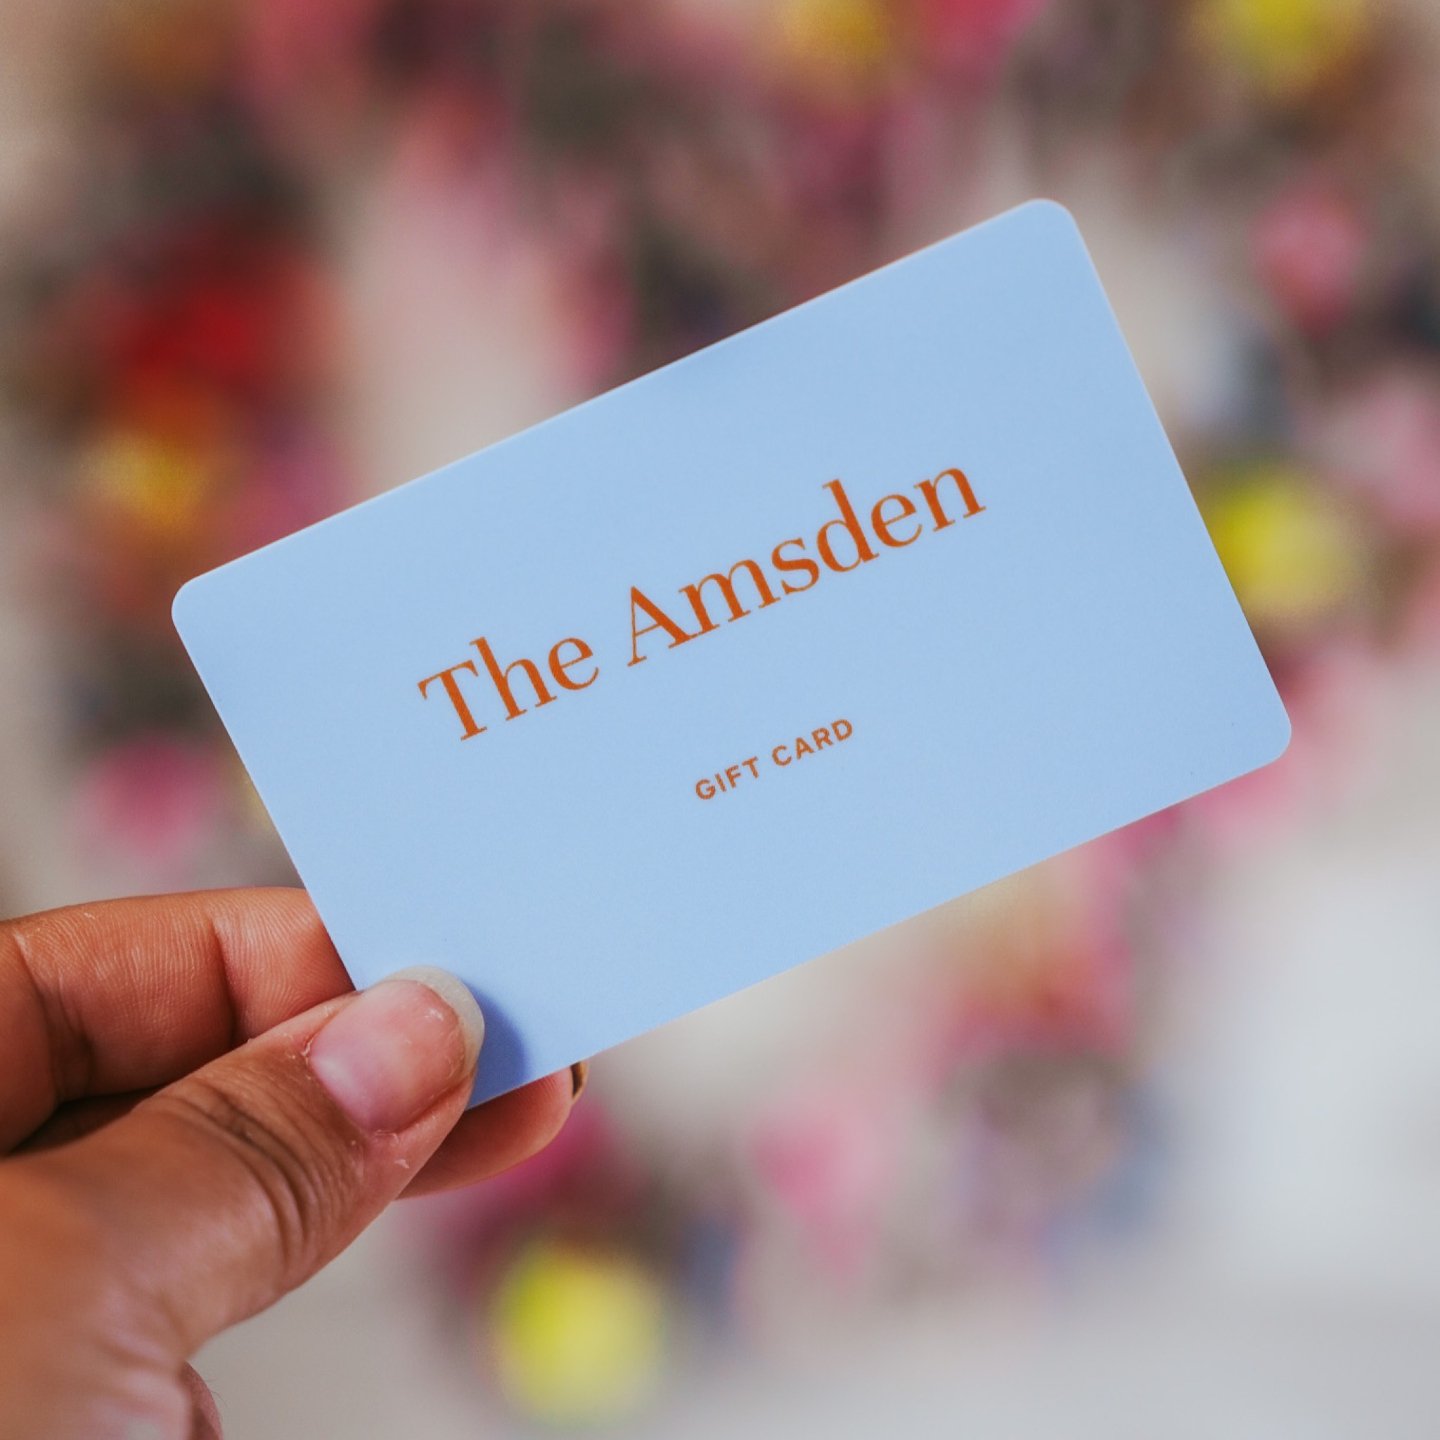 Need a little pick-me-up? ☕ Our gift cards are the perfect excuse to treat yourself or someone you love to a coffee-fueled shopping spree! 🛍️ 

Who's up for some caffeine-infused retail therapy?

#theamsden #amsden #amsdencoffeeclub #gathermercantil